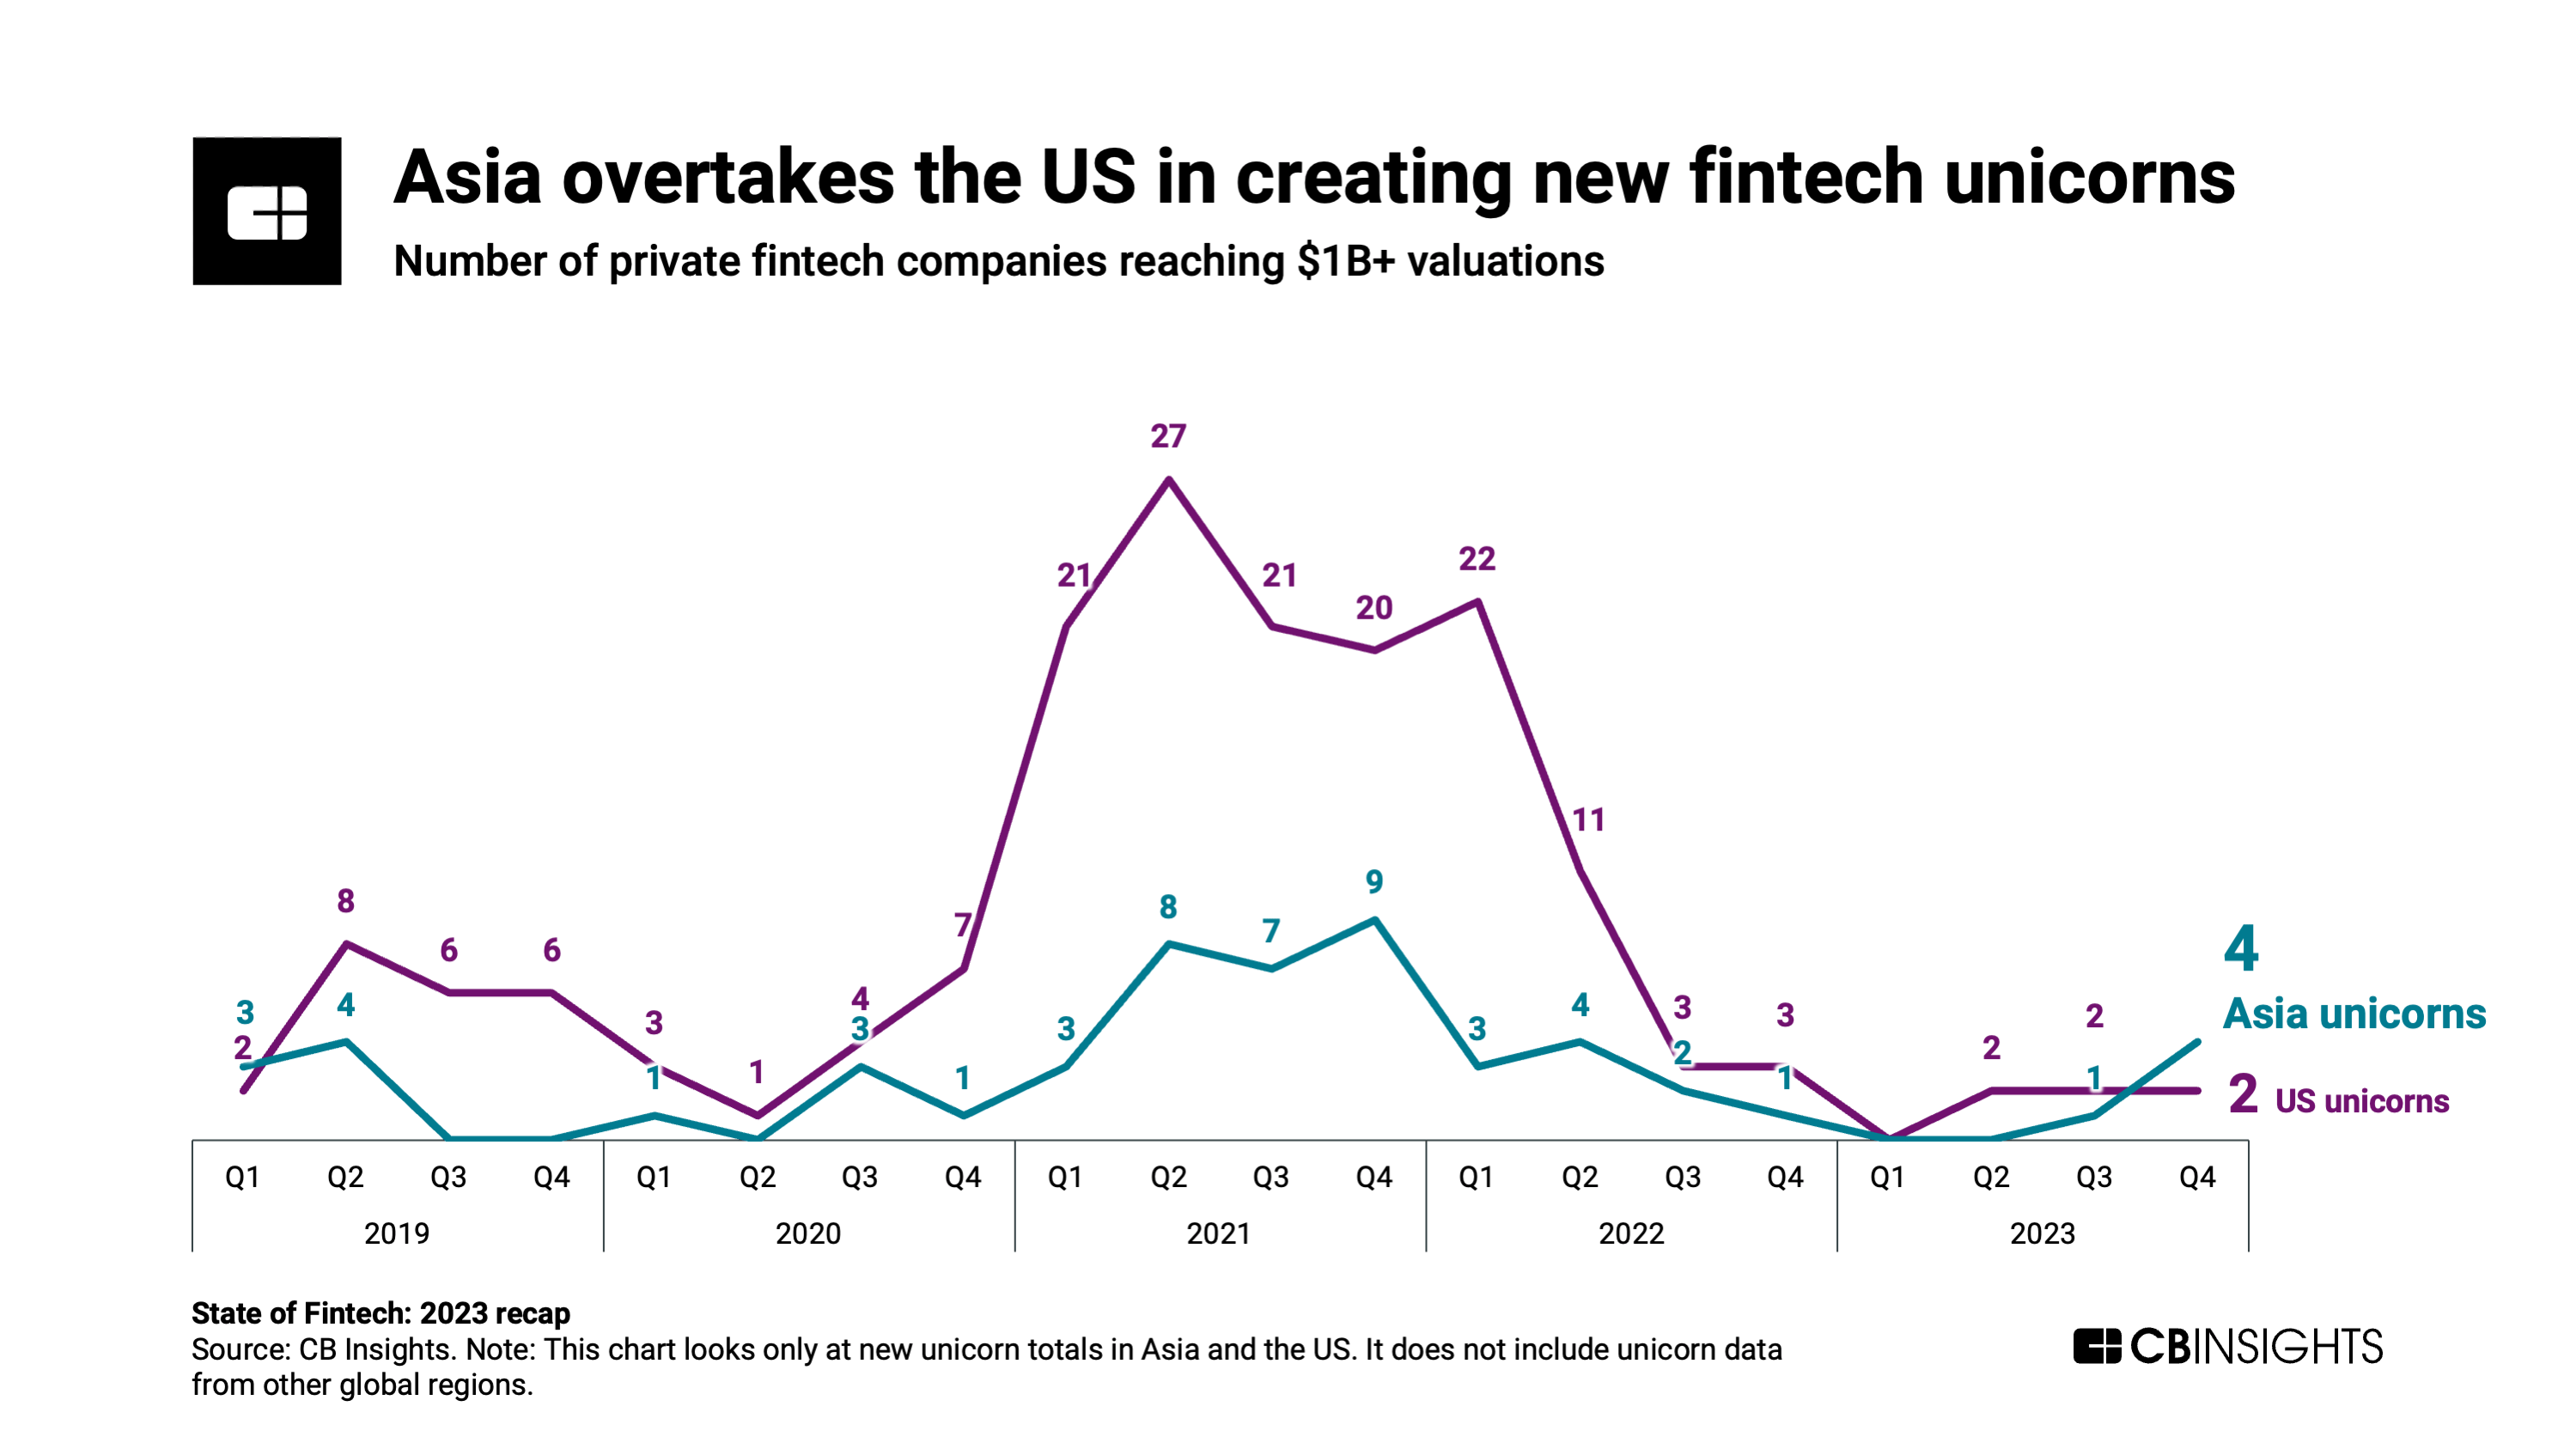 Asia overtakes the US in creating new fintech unicorns